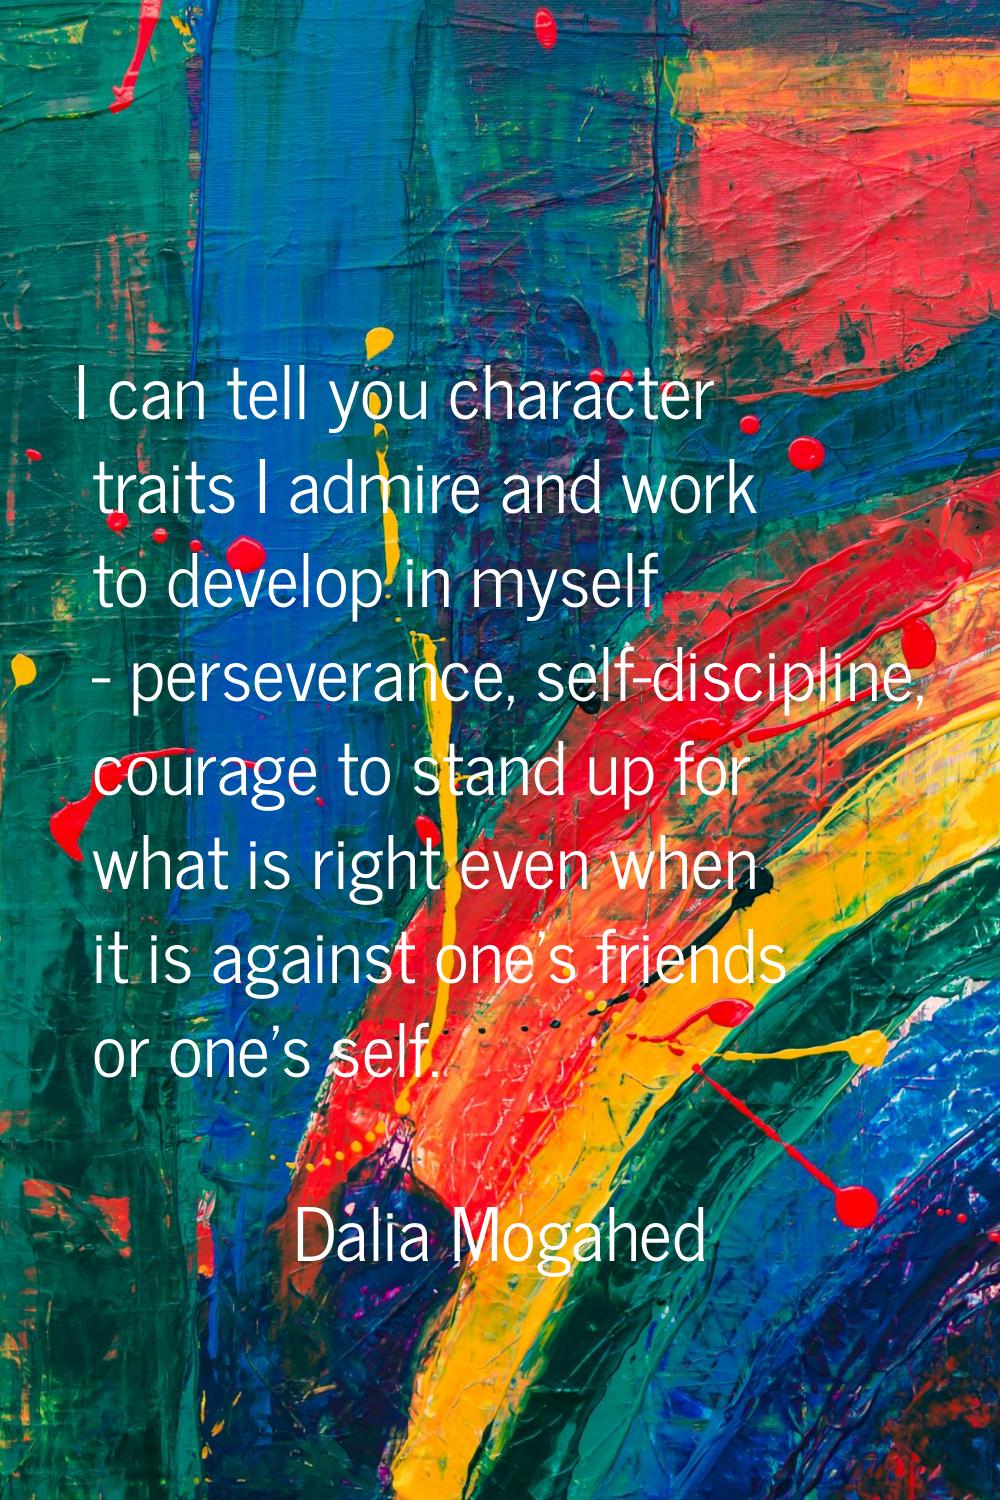 I can tell you character traits I admire and work to develop in myself - perseverance, self-discipl